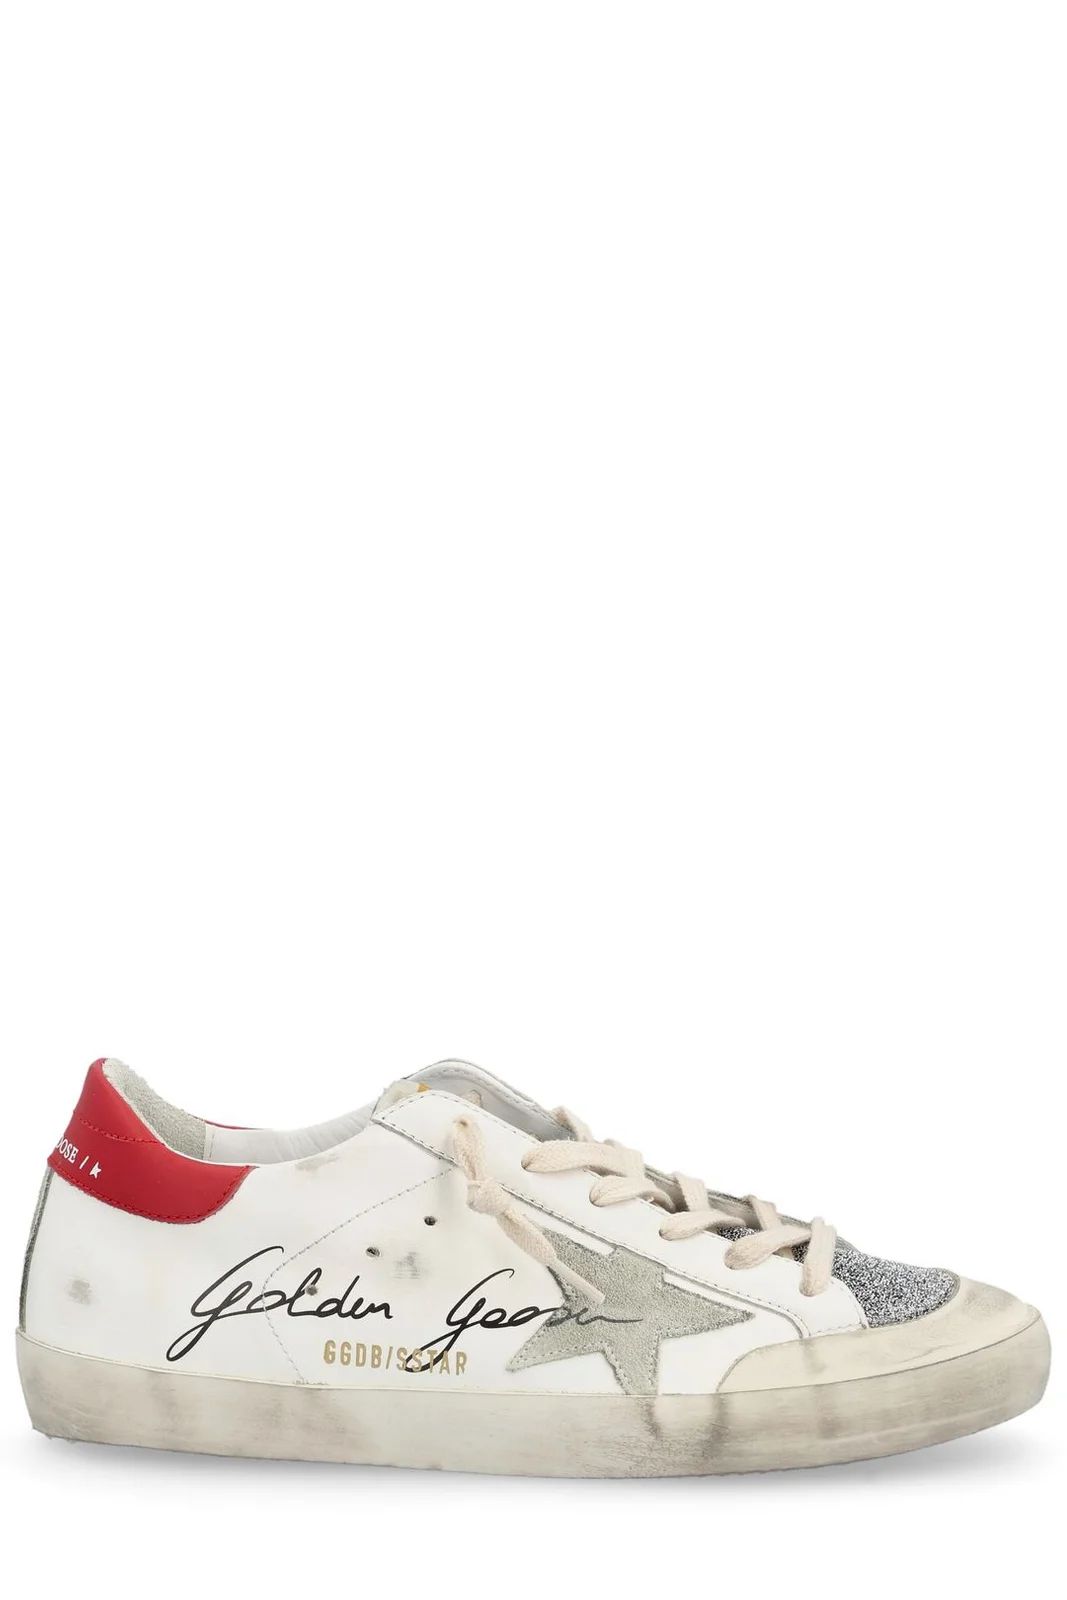 Golden Goose Deluxe Brand Lace-Up Sneakers | Cettire Global